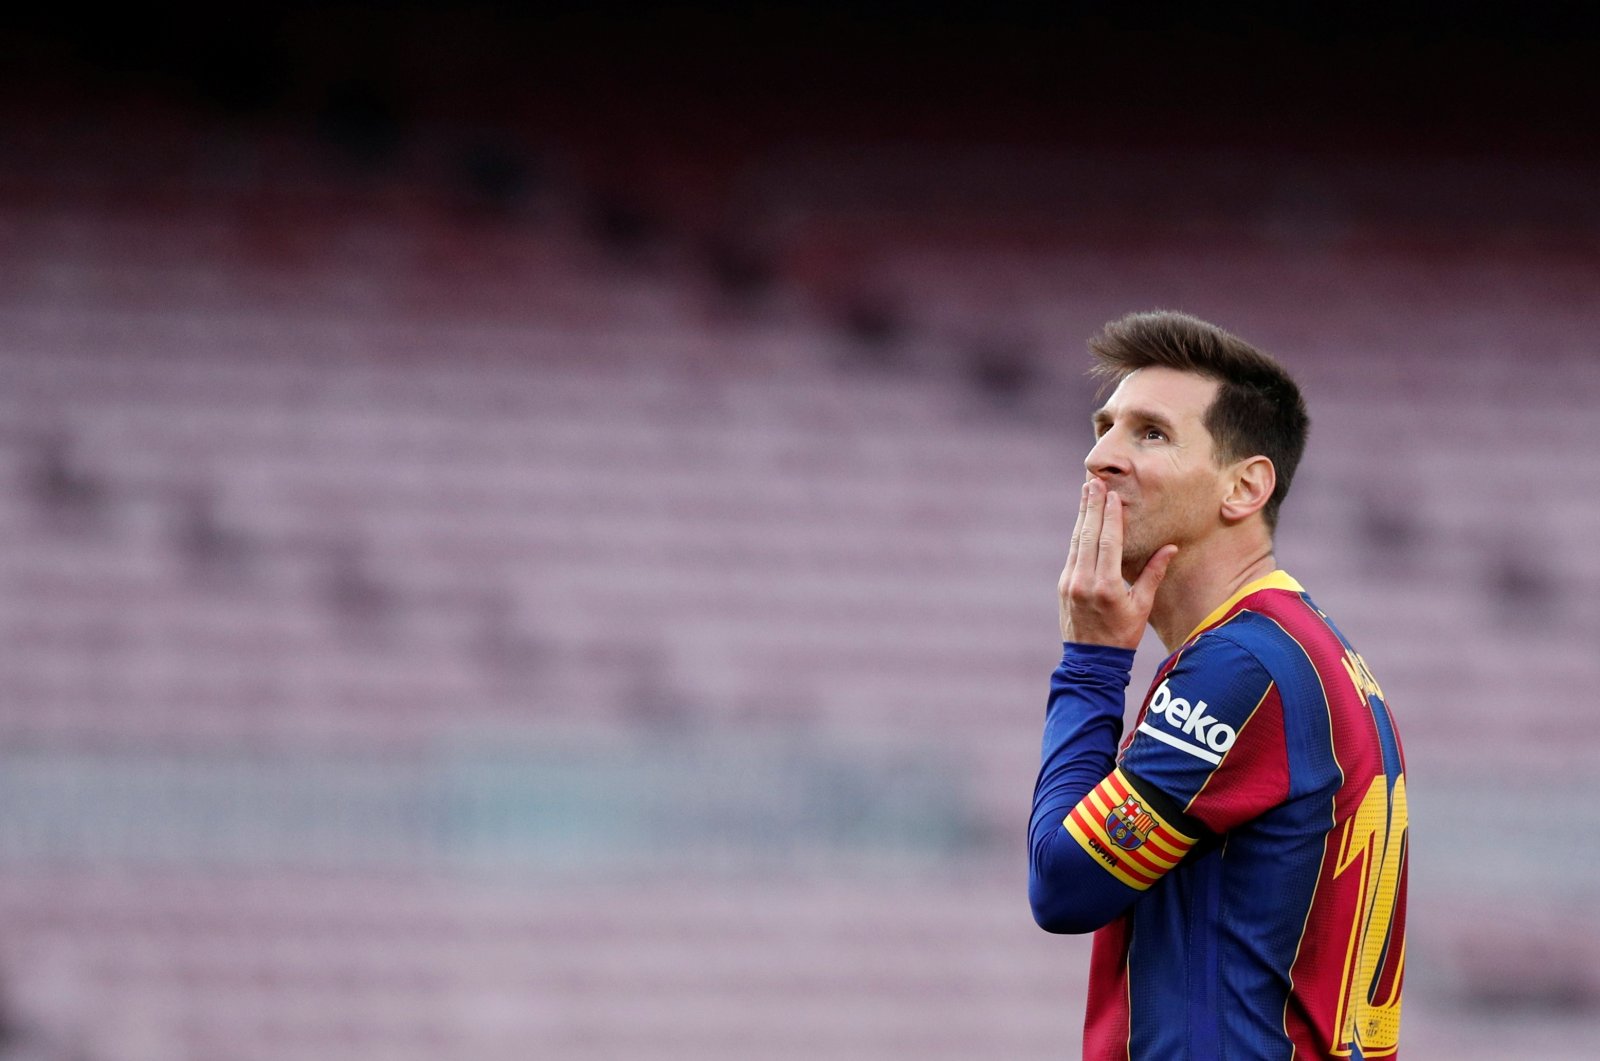 Messi to stay at Barcelona with new 5-year contract, reports say ...